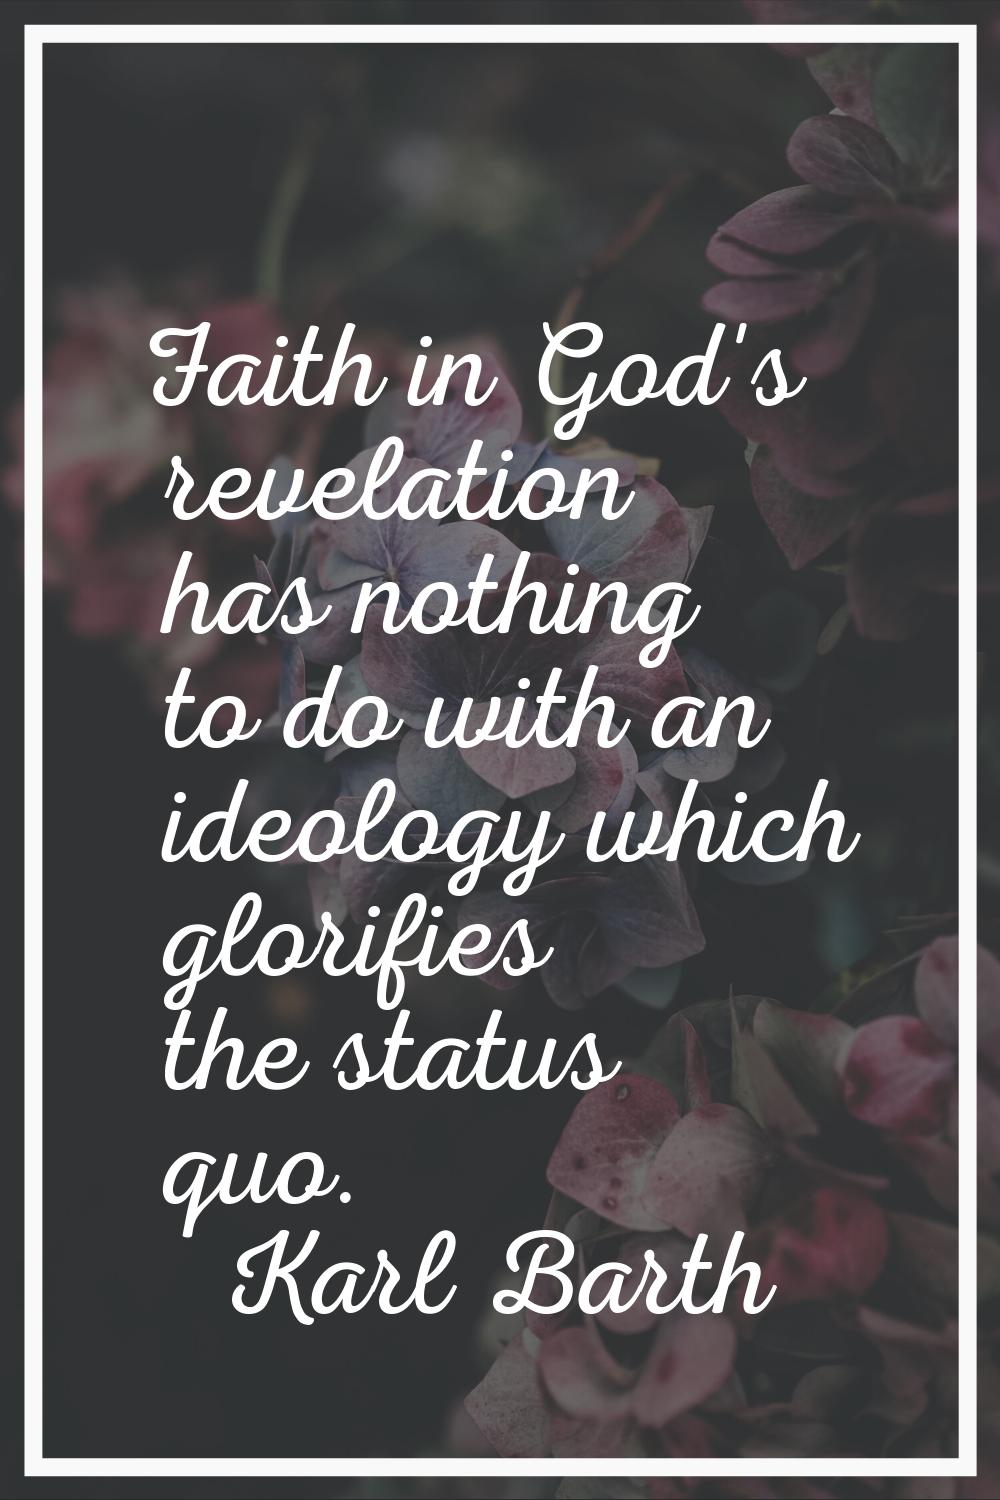 Faith in God's revelation has nothing to do with an ideology which glorifies the status quo.